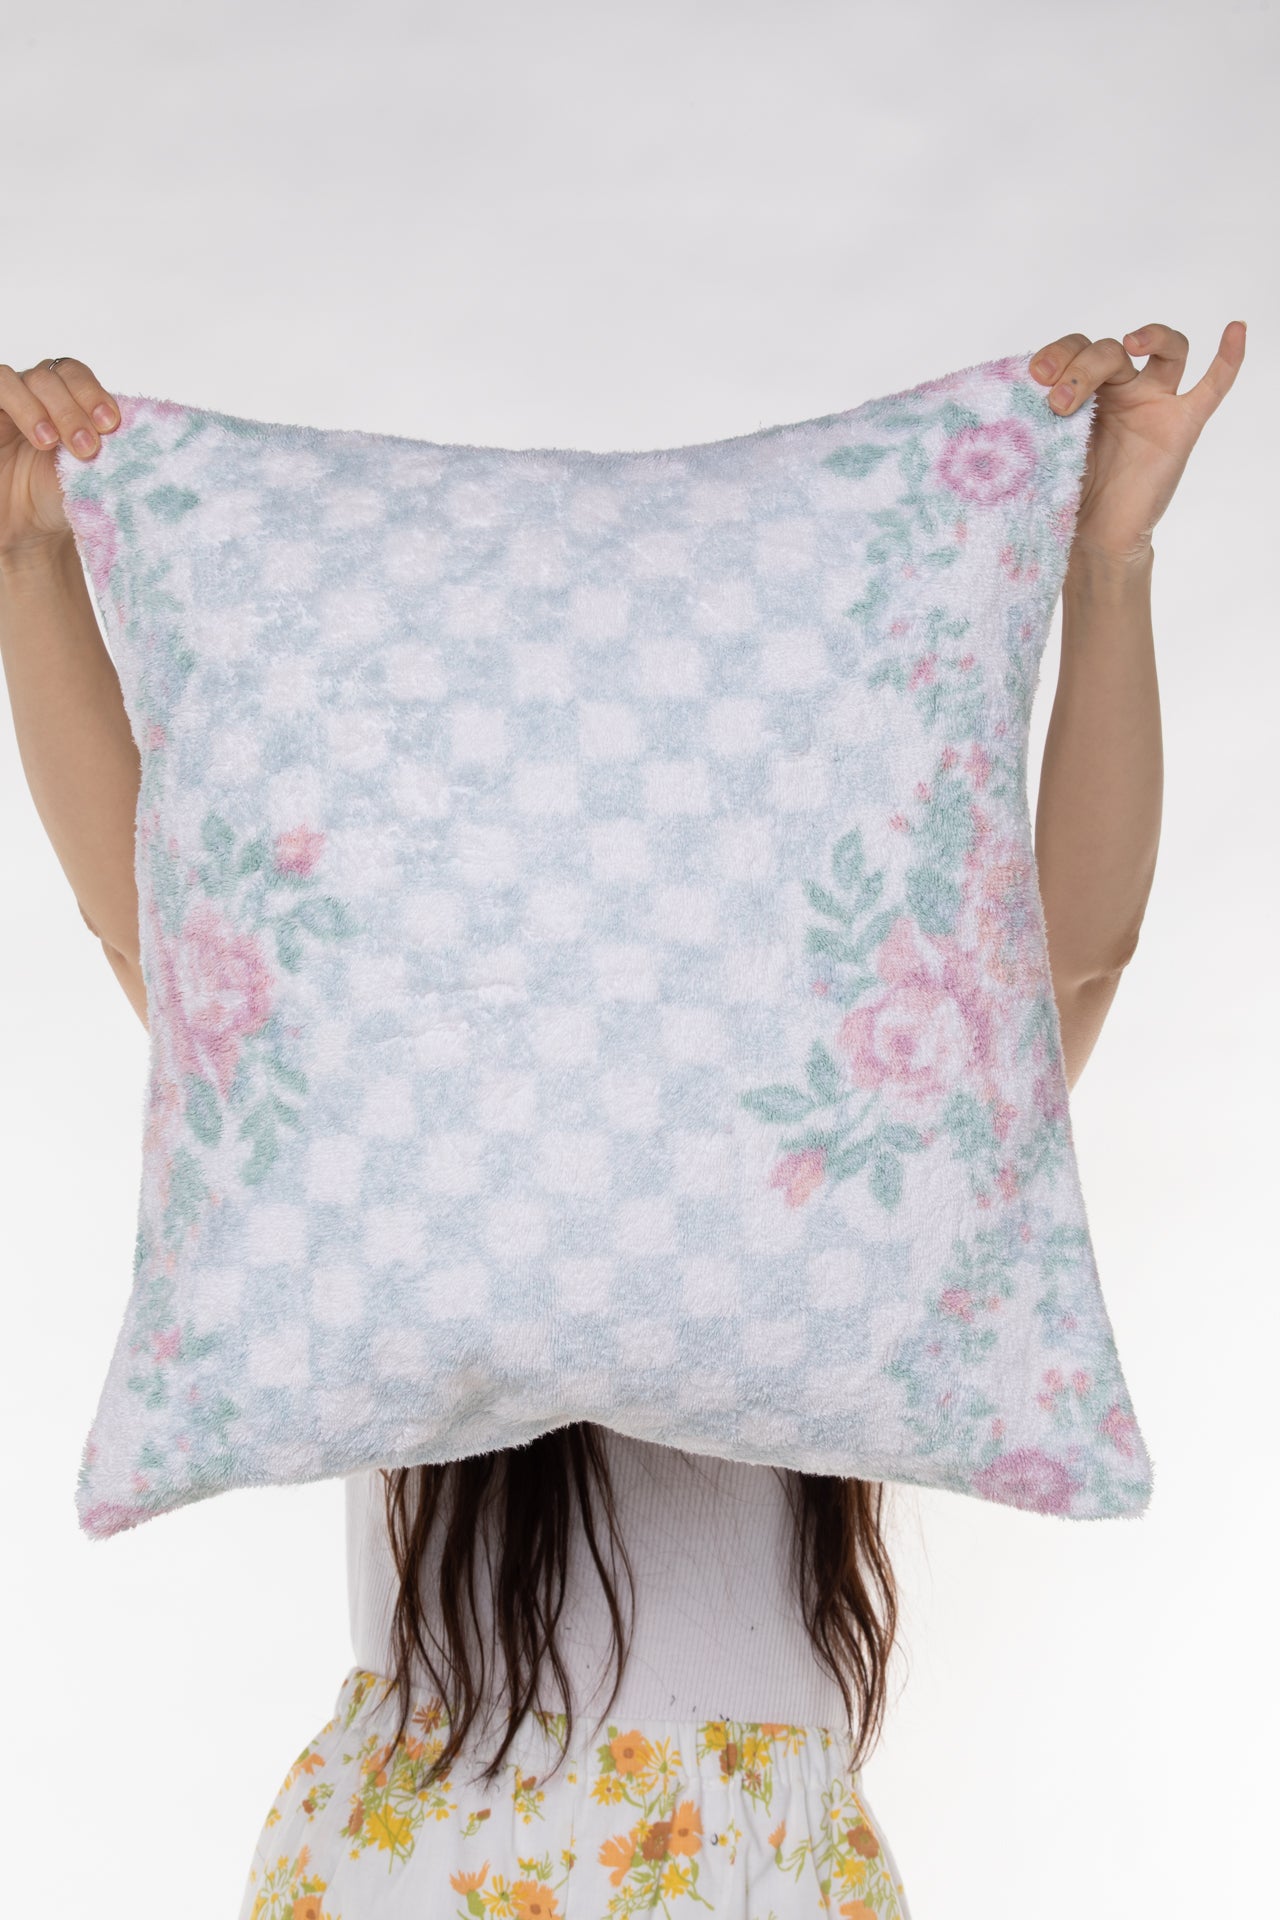 VINTAGE ROSE POOLSIDE PILLOW COVER